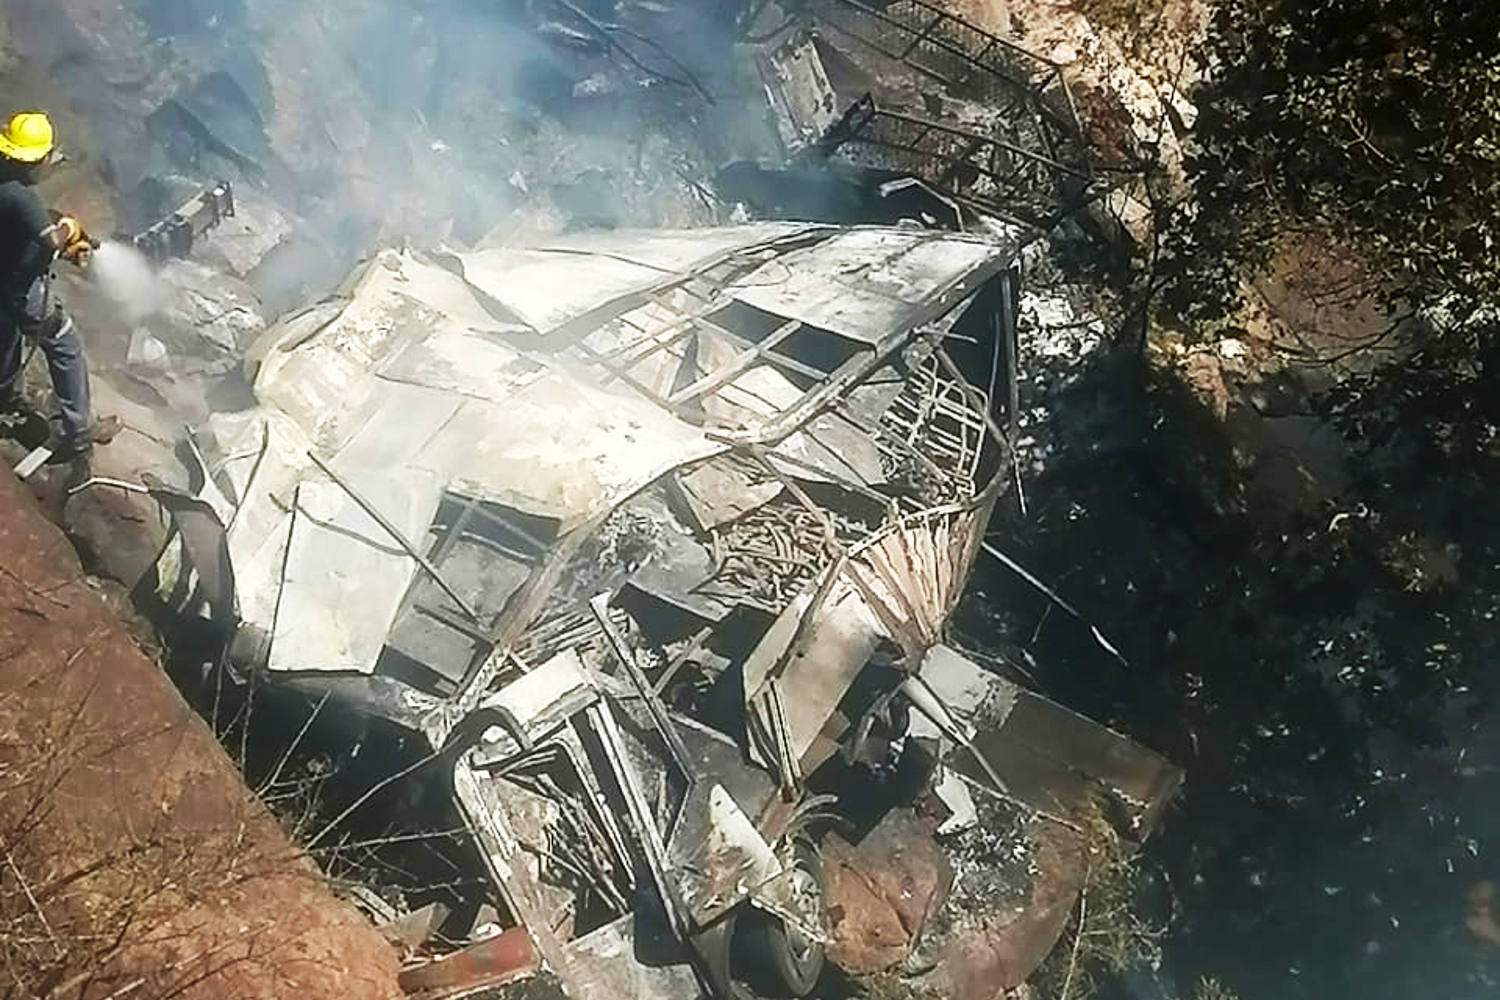 8-year-old is the only survivor after bus plunges off cliff in South Africa, killing 45 people